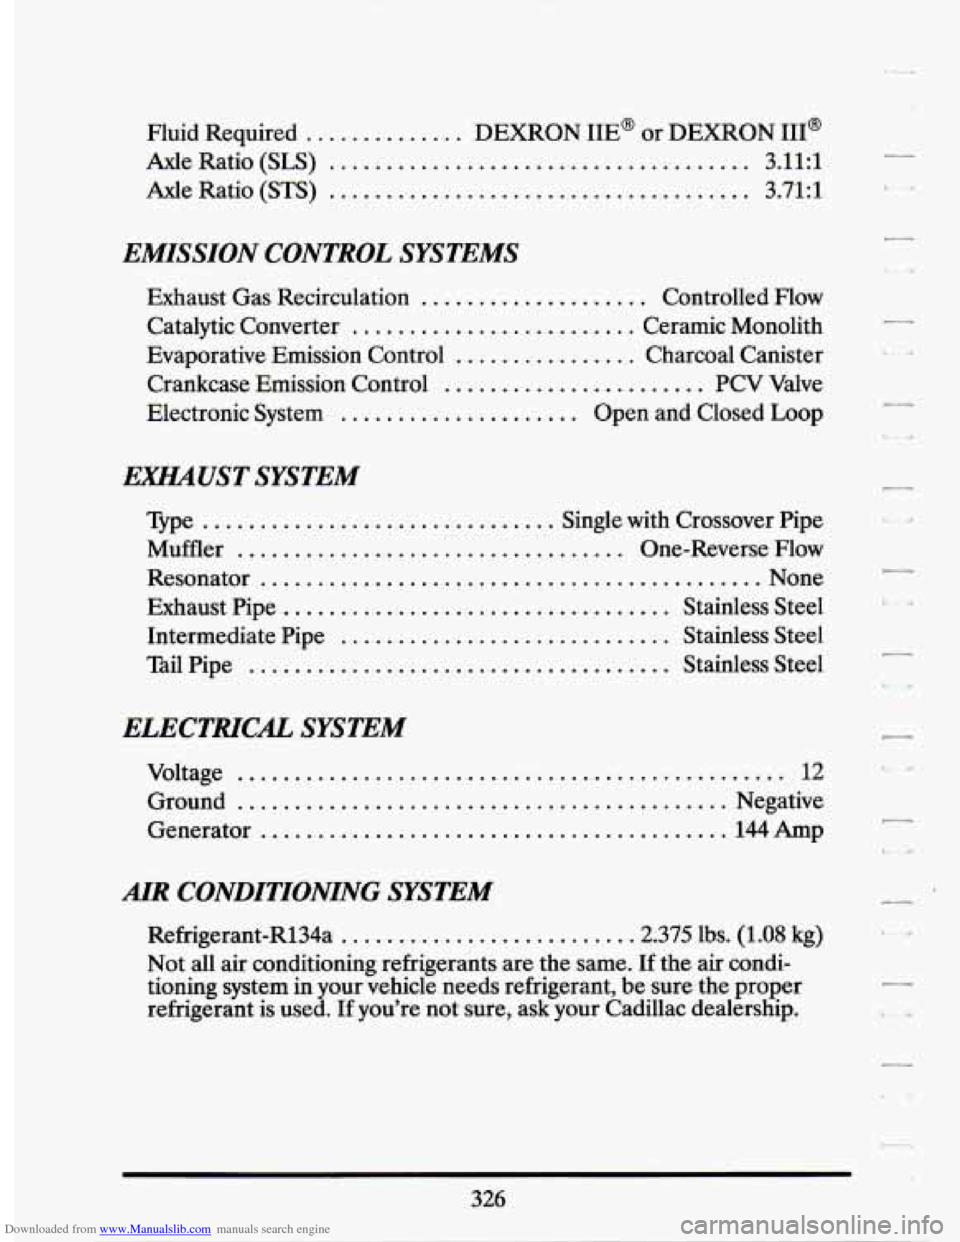 CADILLAC SEVILLE 1994 4.G Owners Manual Downloaded from www.Manualslib.com manuals search engine Fluid Required .............. DEXRON IIE or  DEXRON 111 
Axle Ratio (SLS) ..................................... 3.11:l 
Axle Ratio (STS) ....